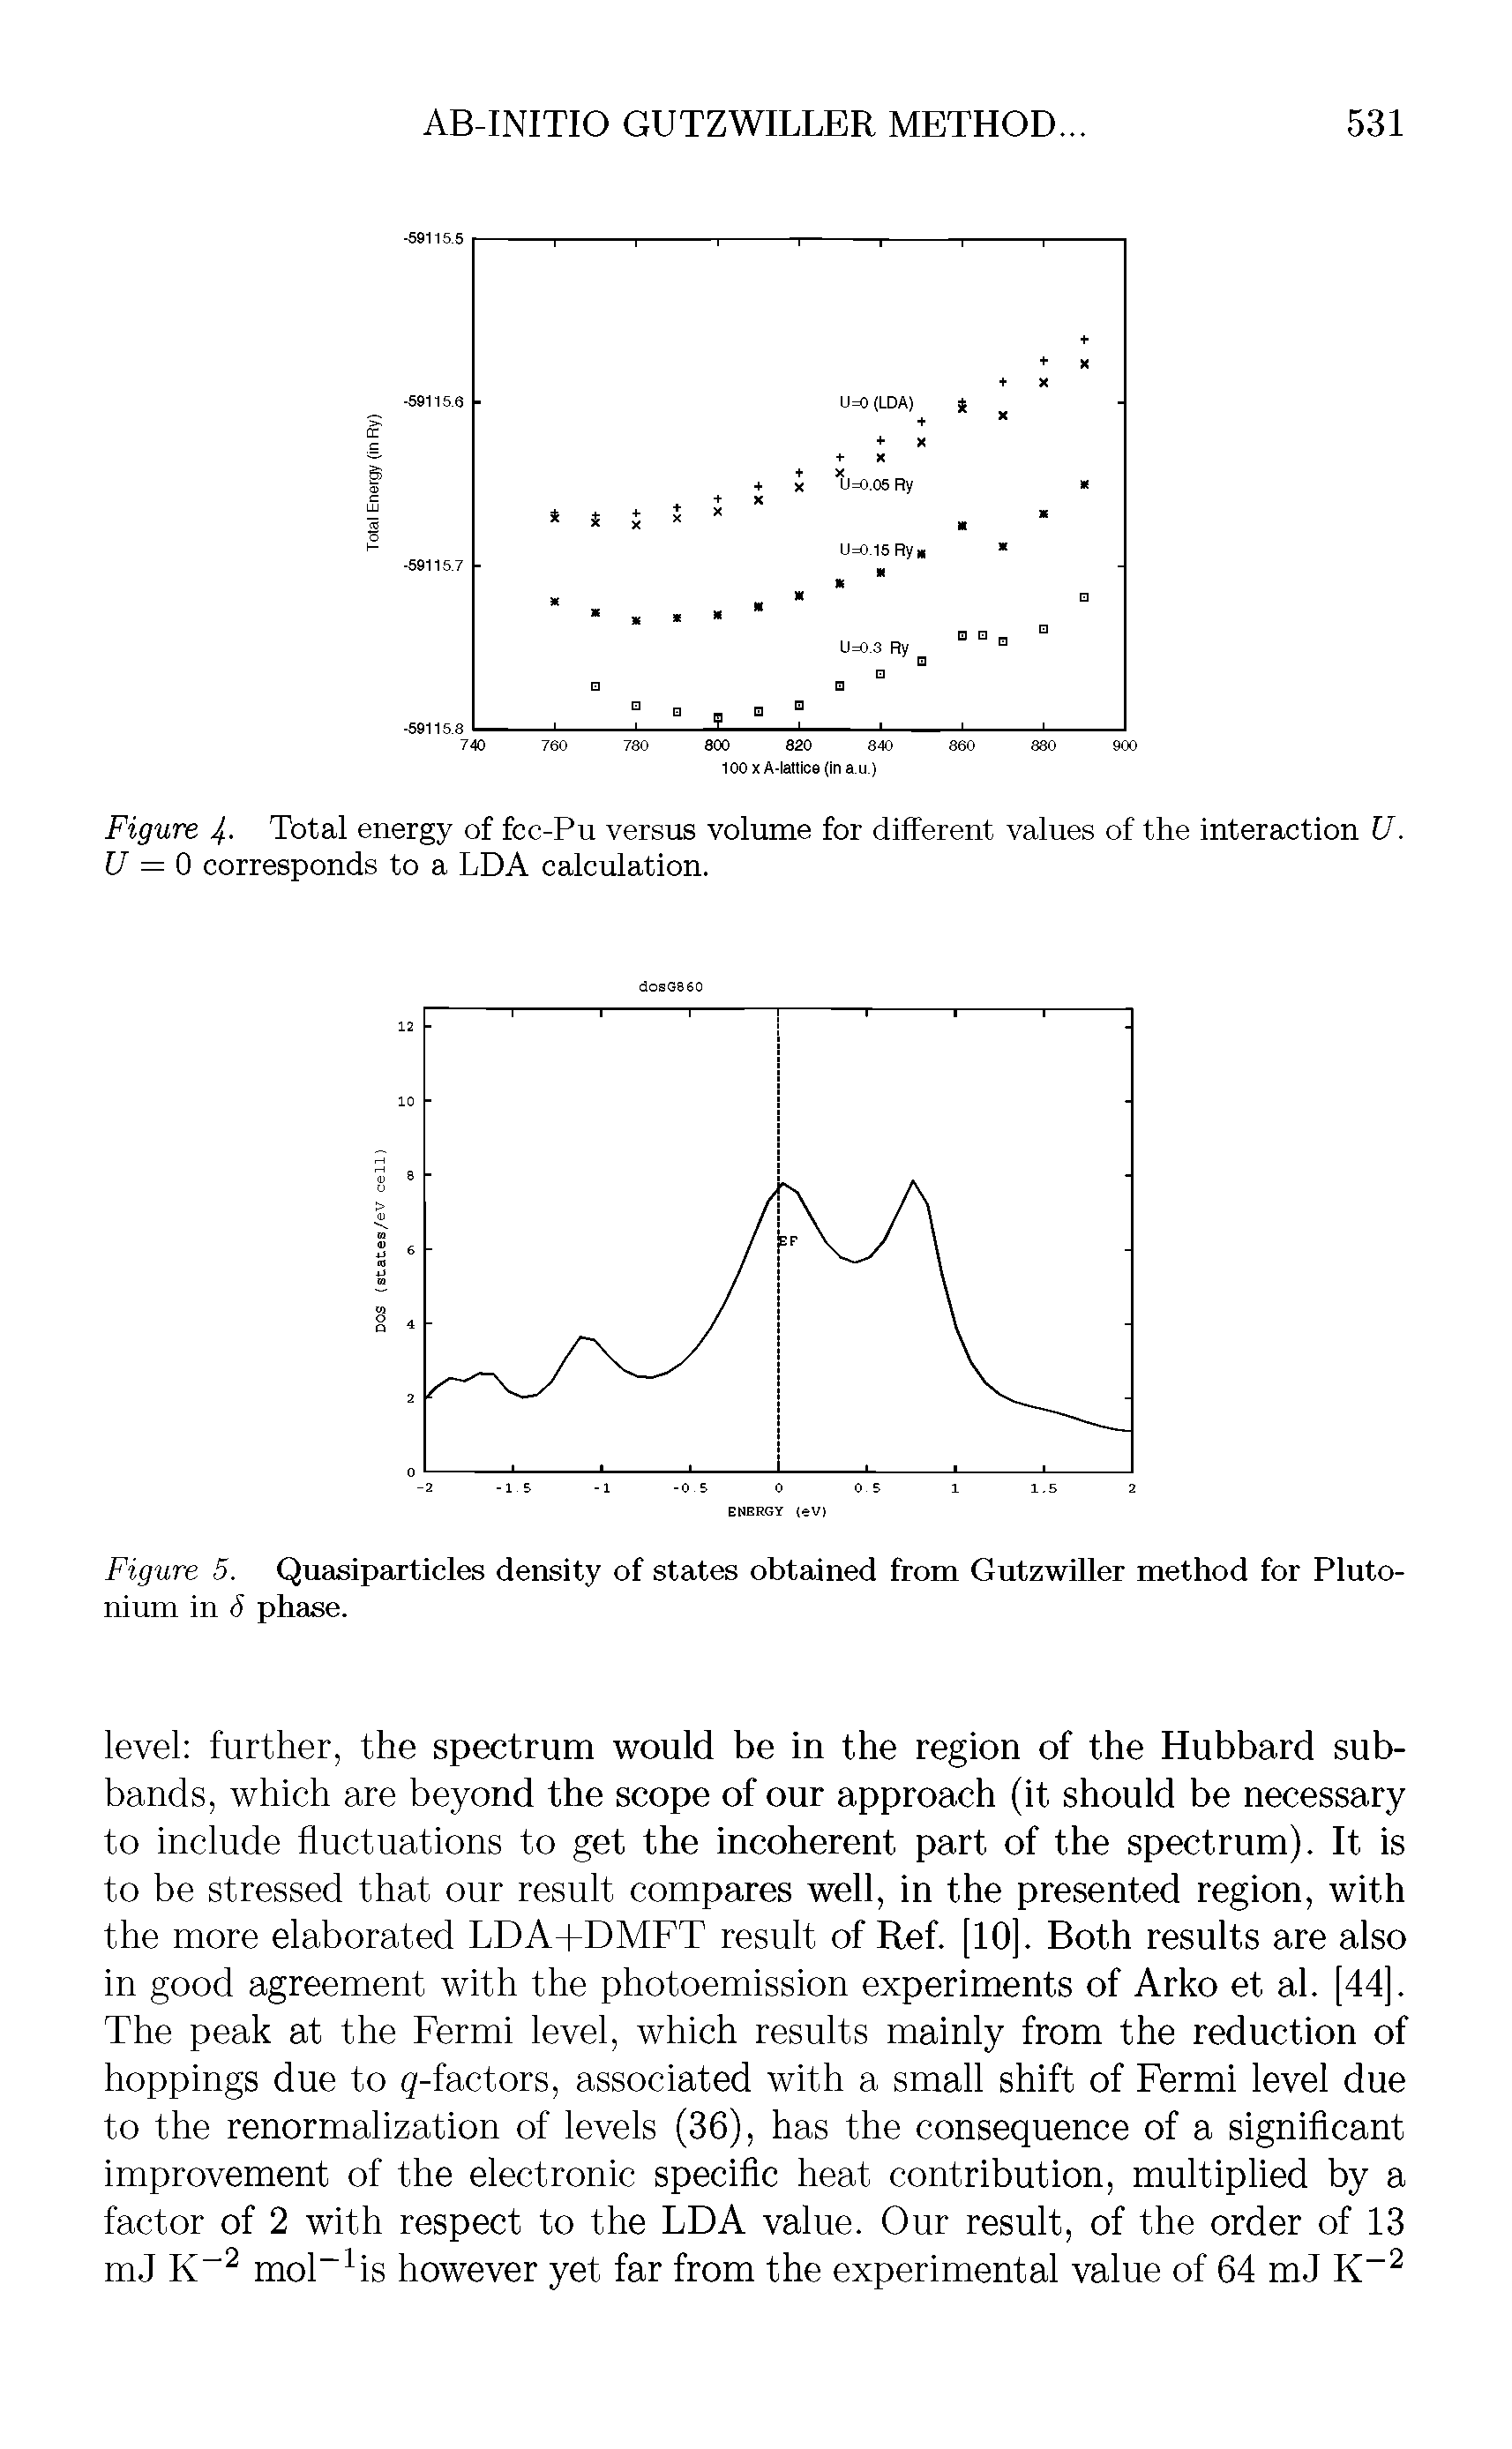 Figure 5. Quasiparticles density of states obtained from Gutzwiller method for Plutonium in S phase.